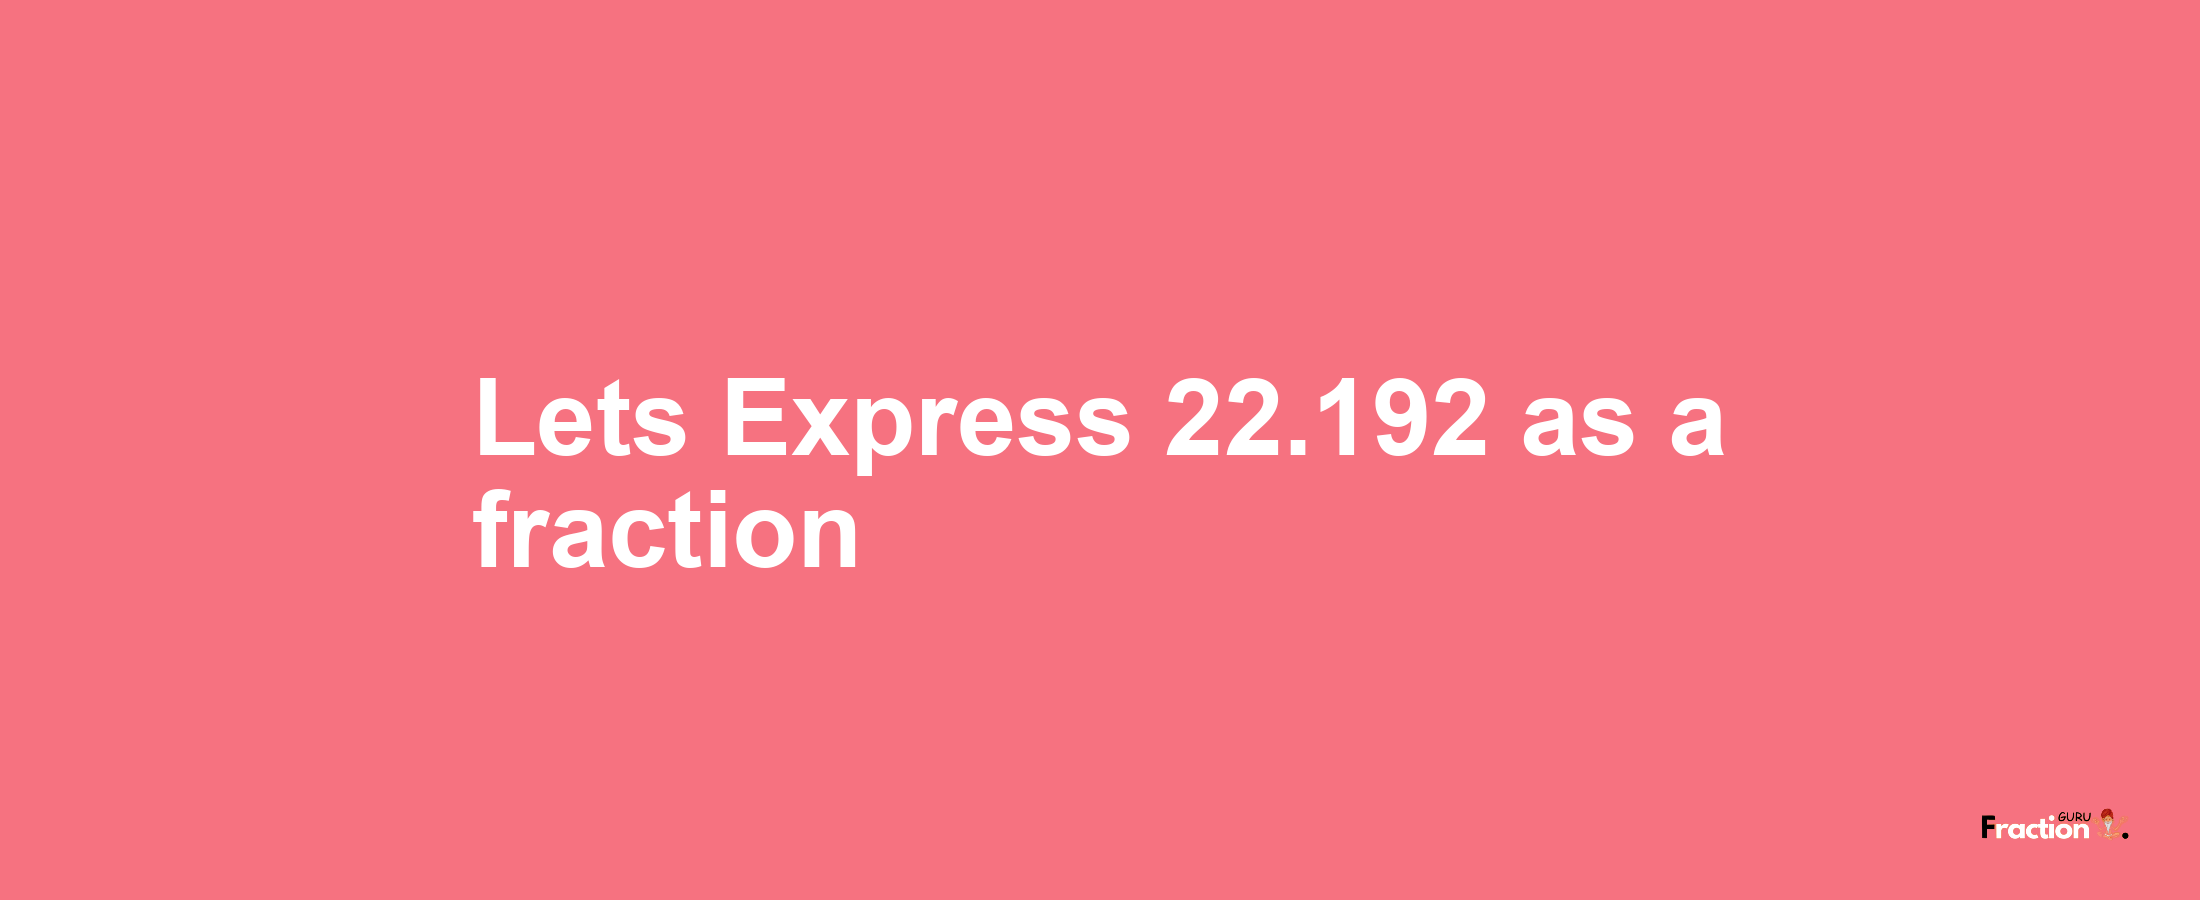 Lets Express 22.192 as afraction